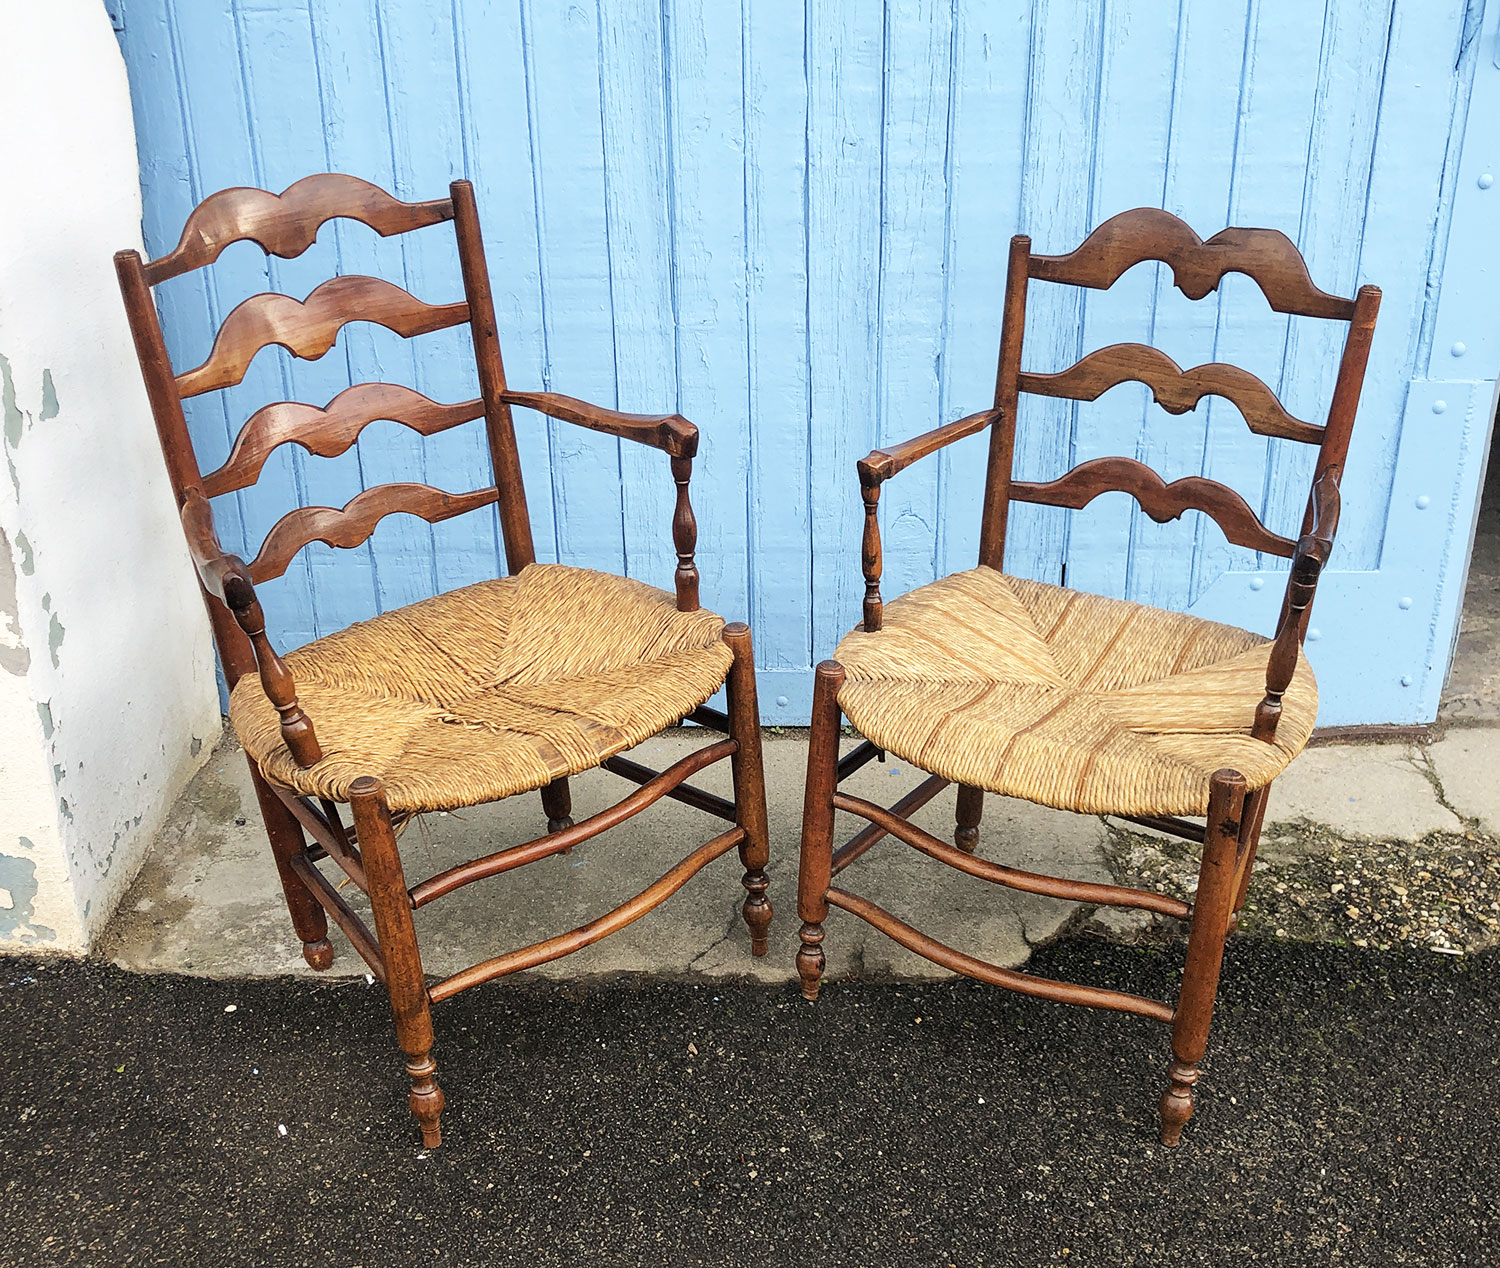 Pair of Provençal Armchairs, Late 18th / Early 19th Century